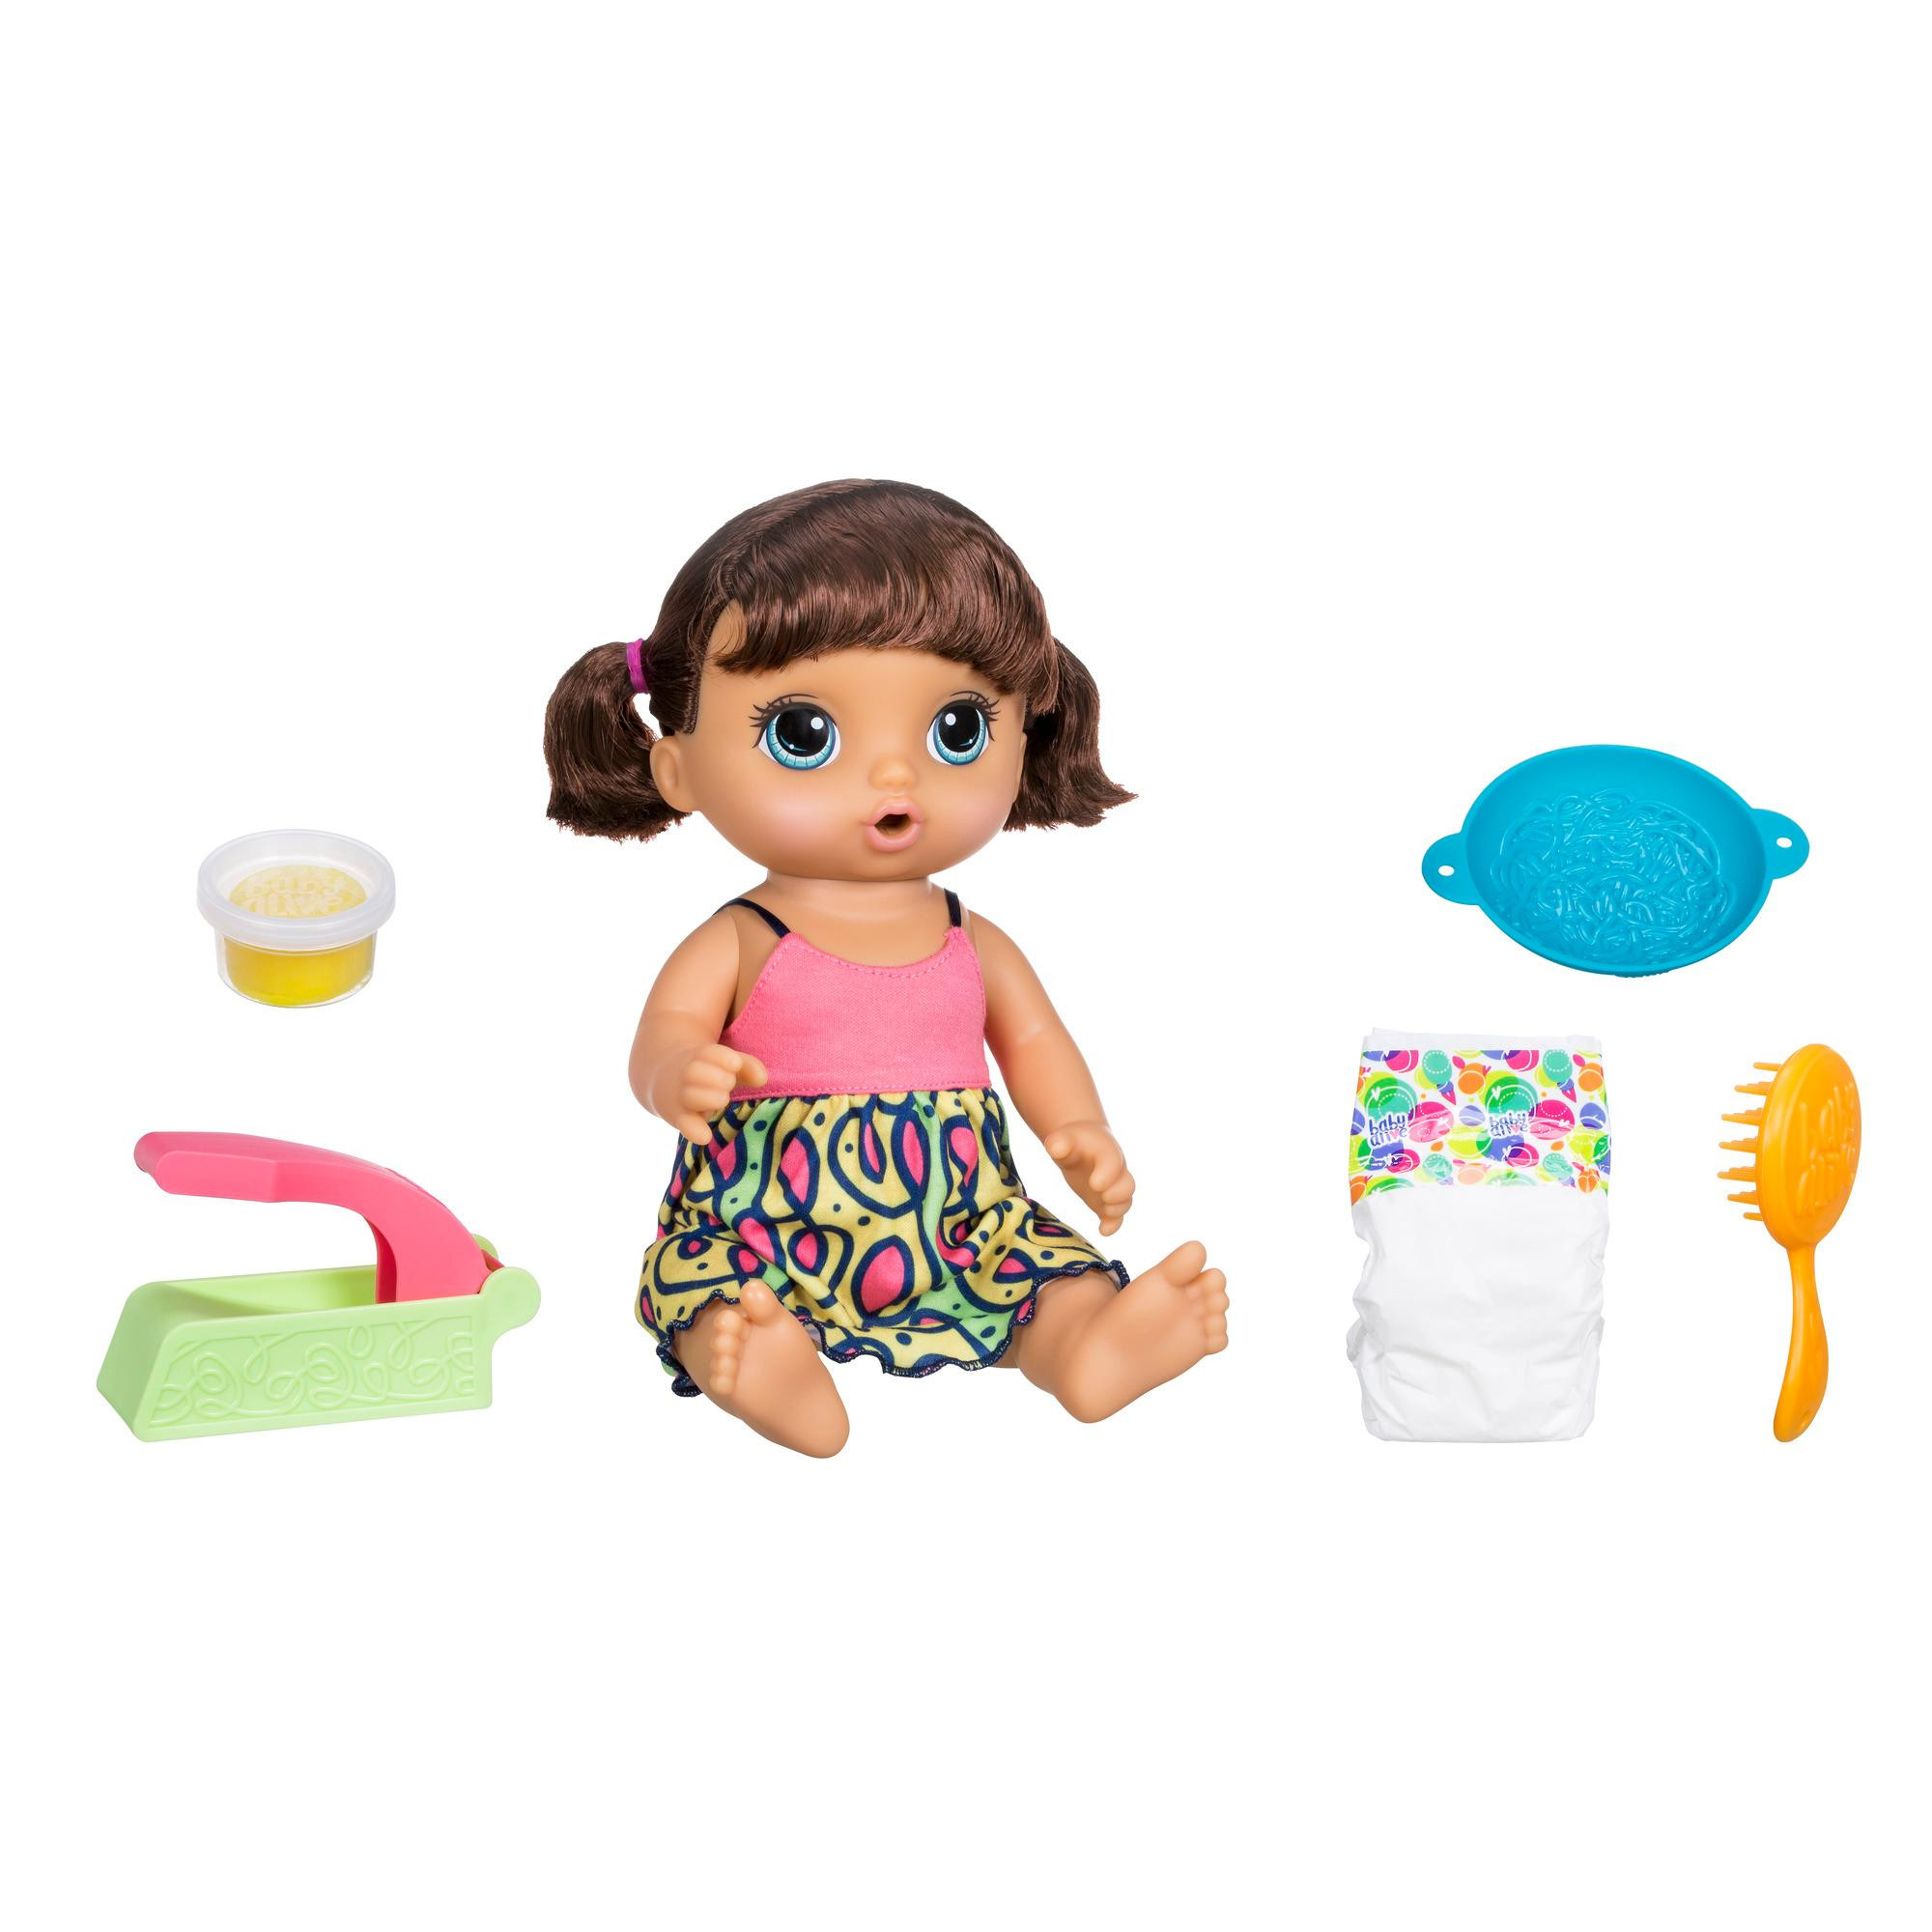 Baby Alive Snackin Noodles
 Amazon Baby Alive Super Snacks Snackin Noodles Baby